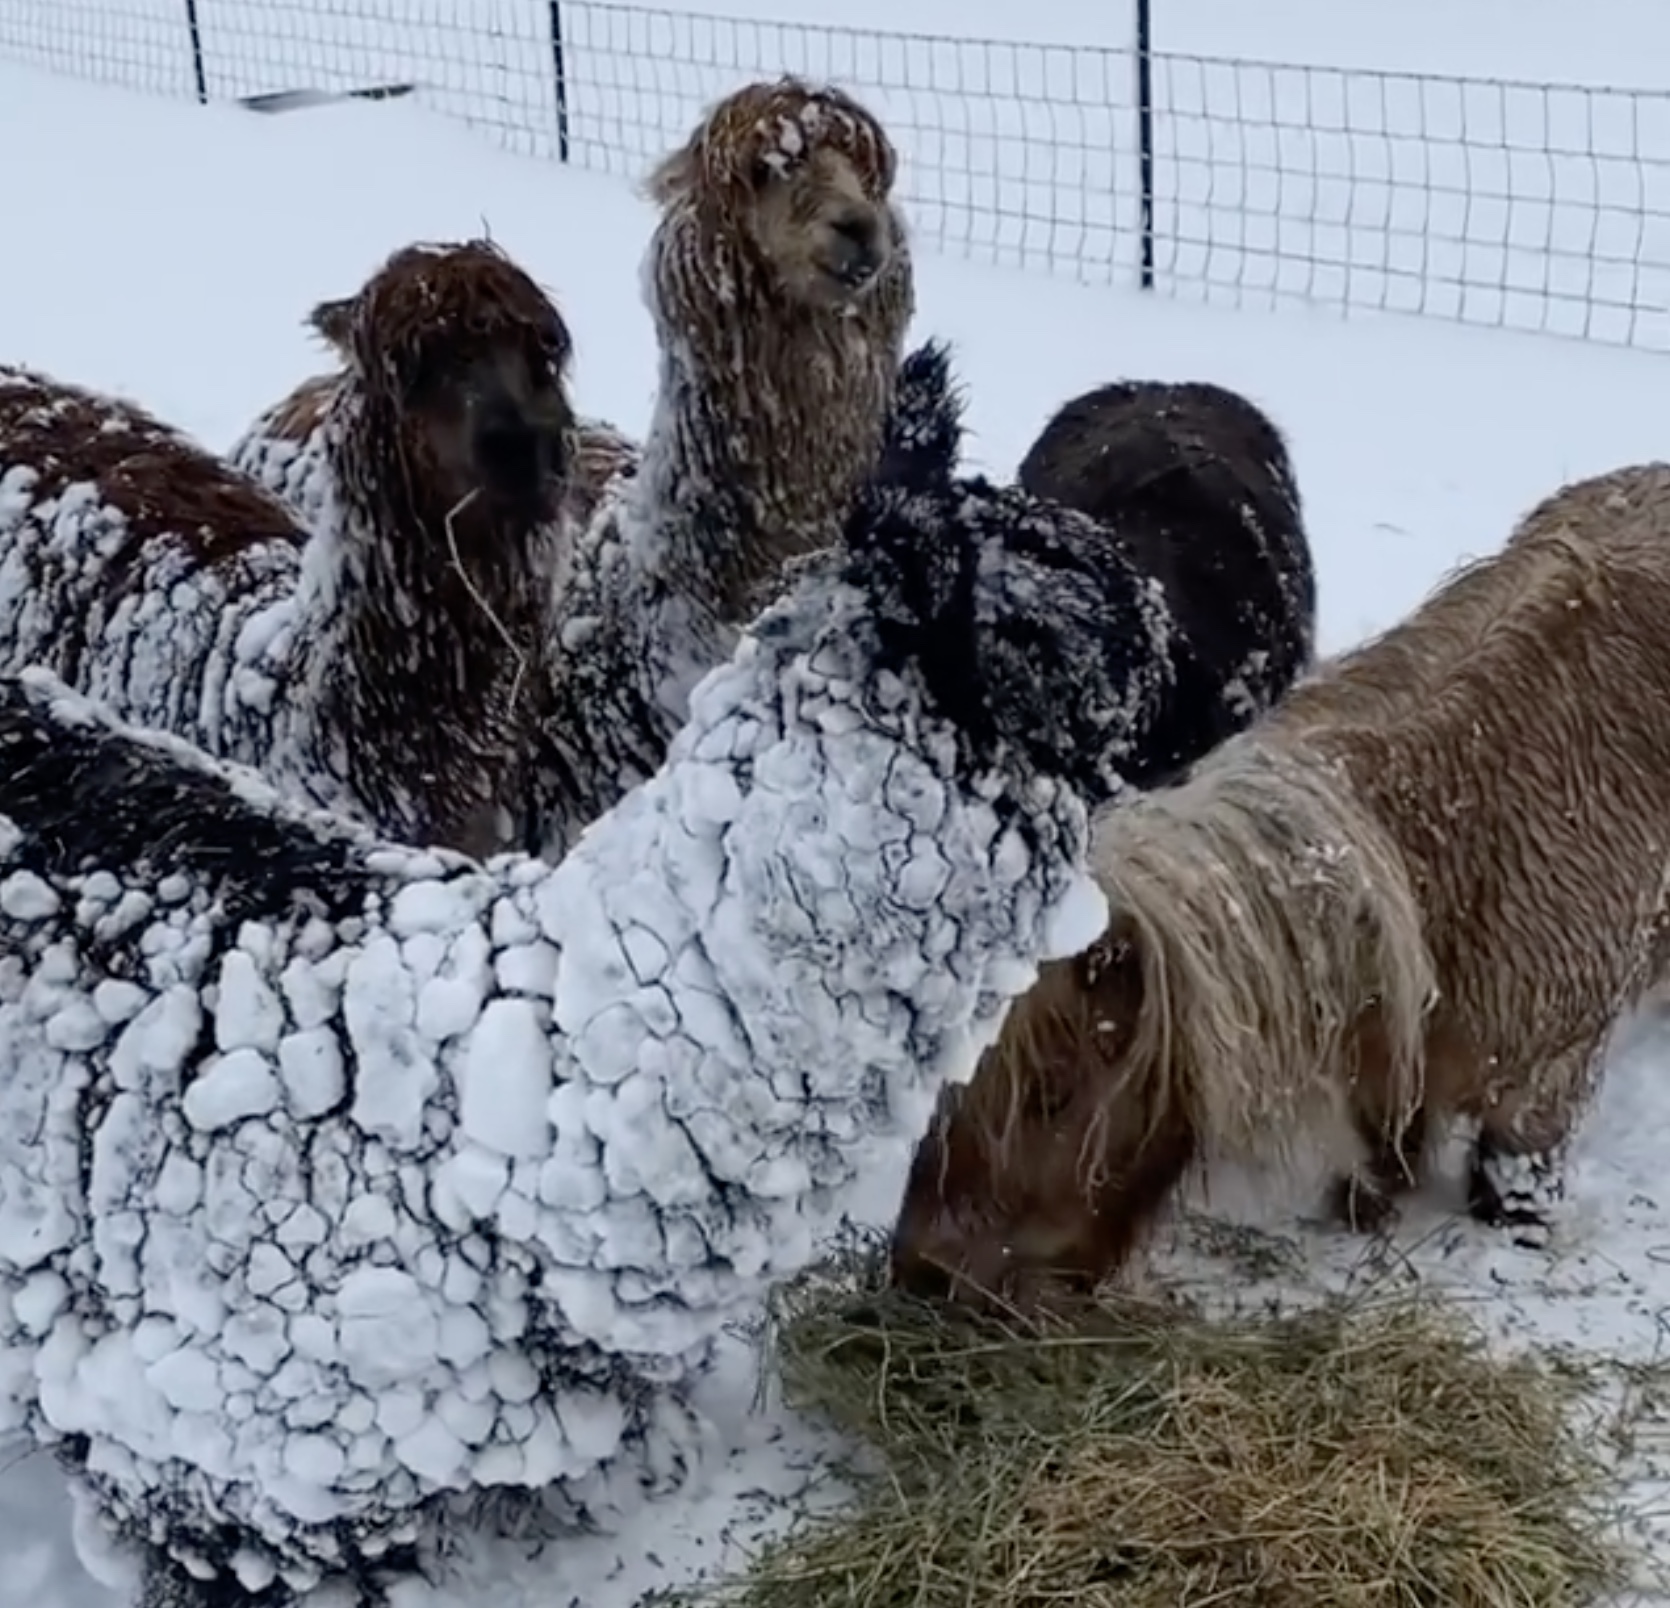 Cold enough to freeze the clackers off these alpacas